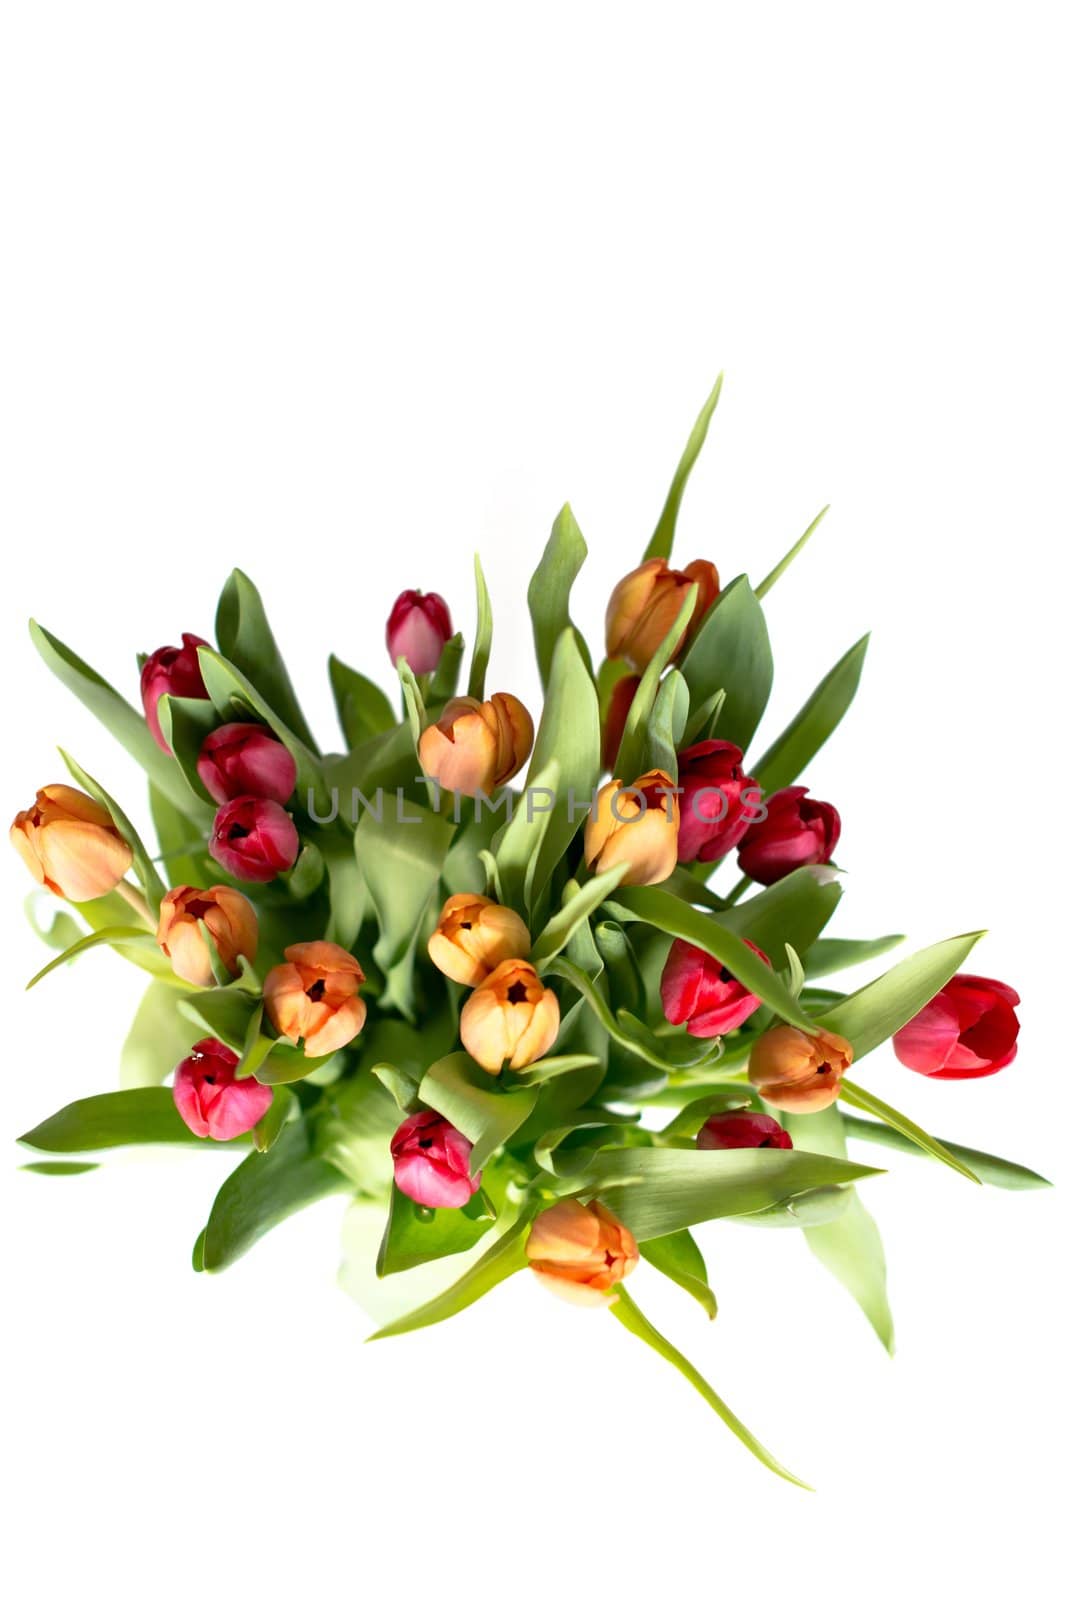 Bouquet of tulips on white - vertical by franky242